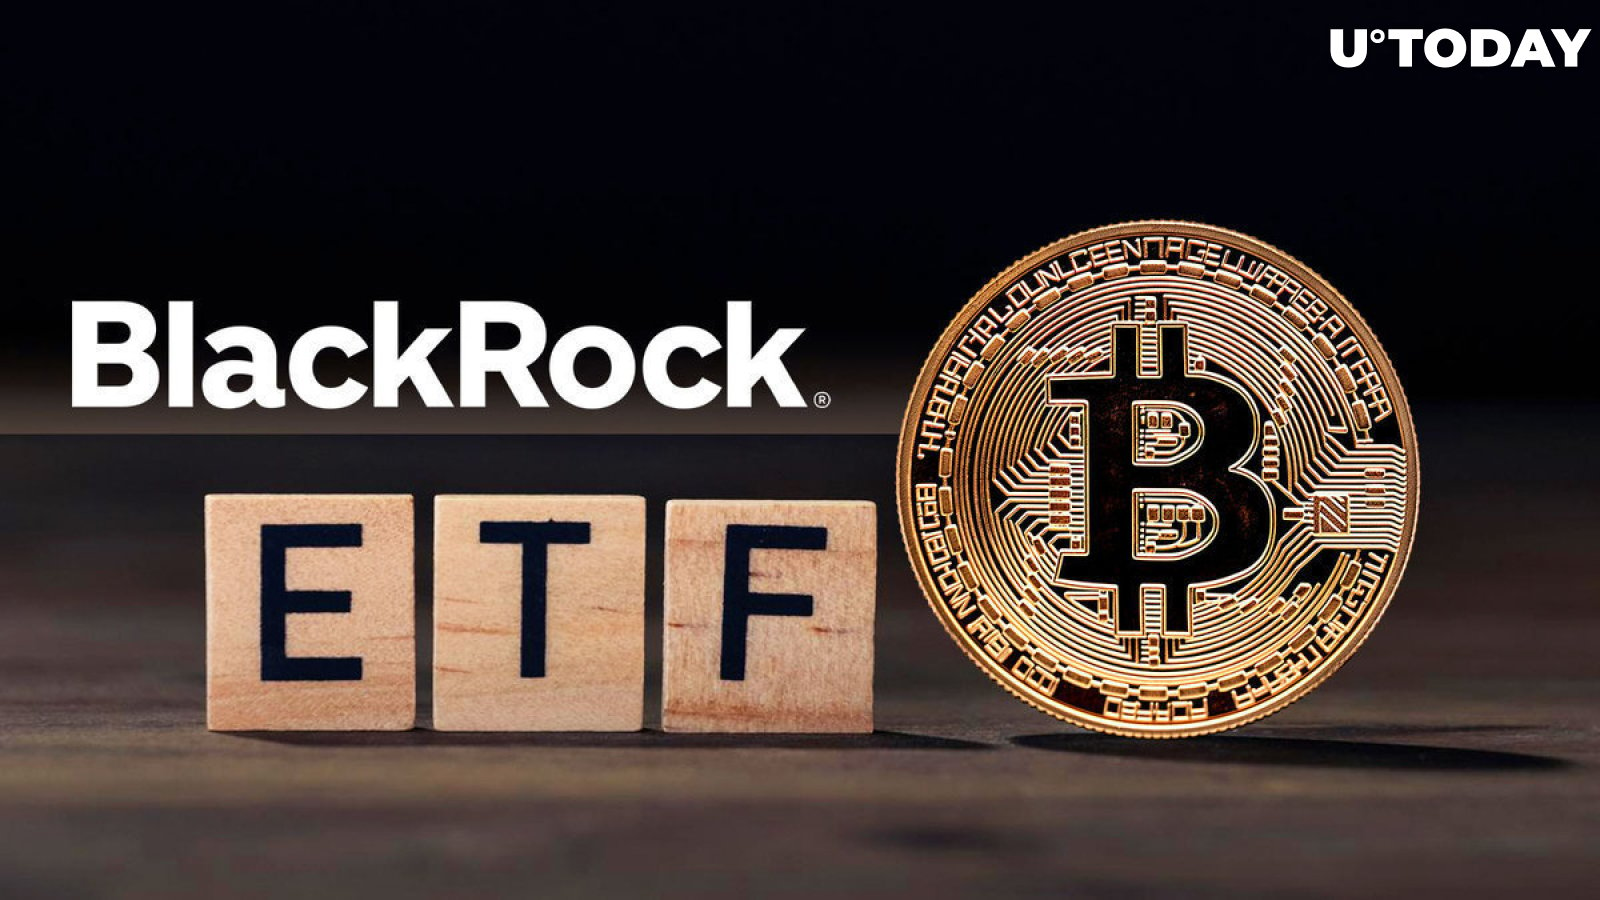 BlackRock Bitcoin ETF Surpasses Rivals as This Crucial Metric Hits New Record